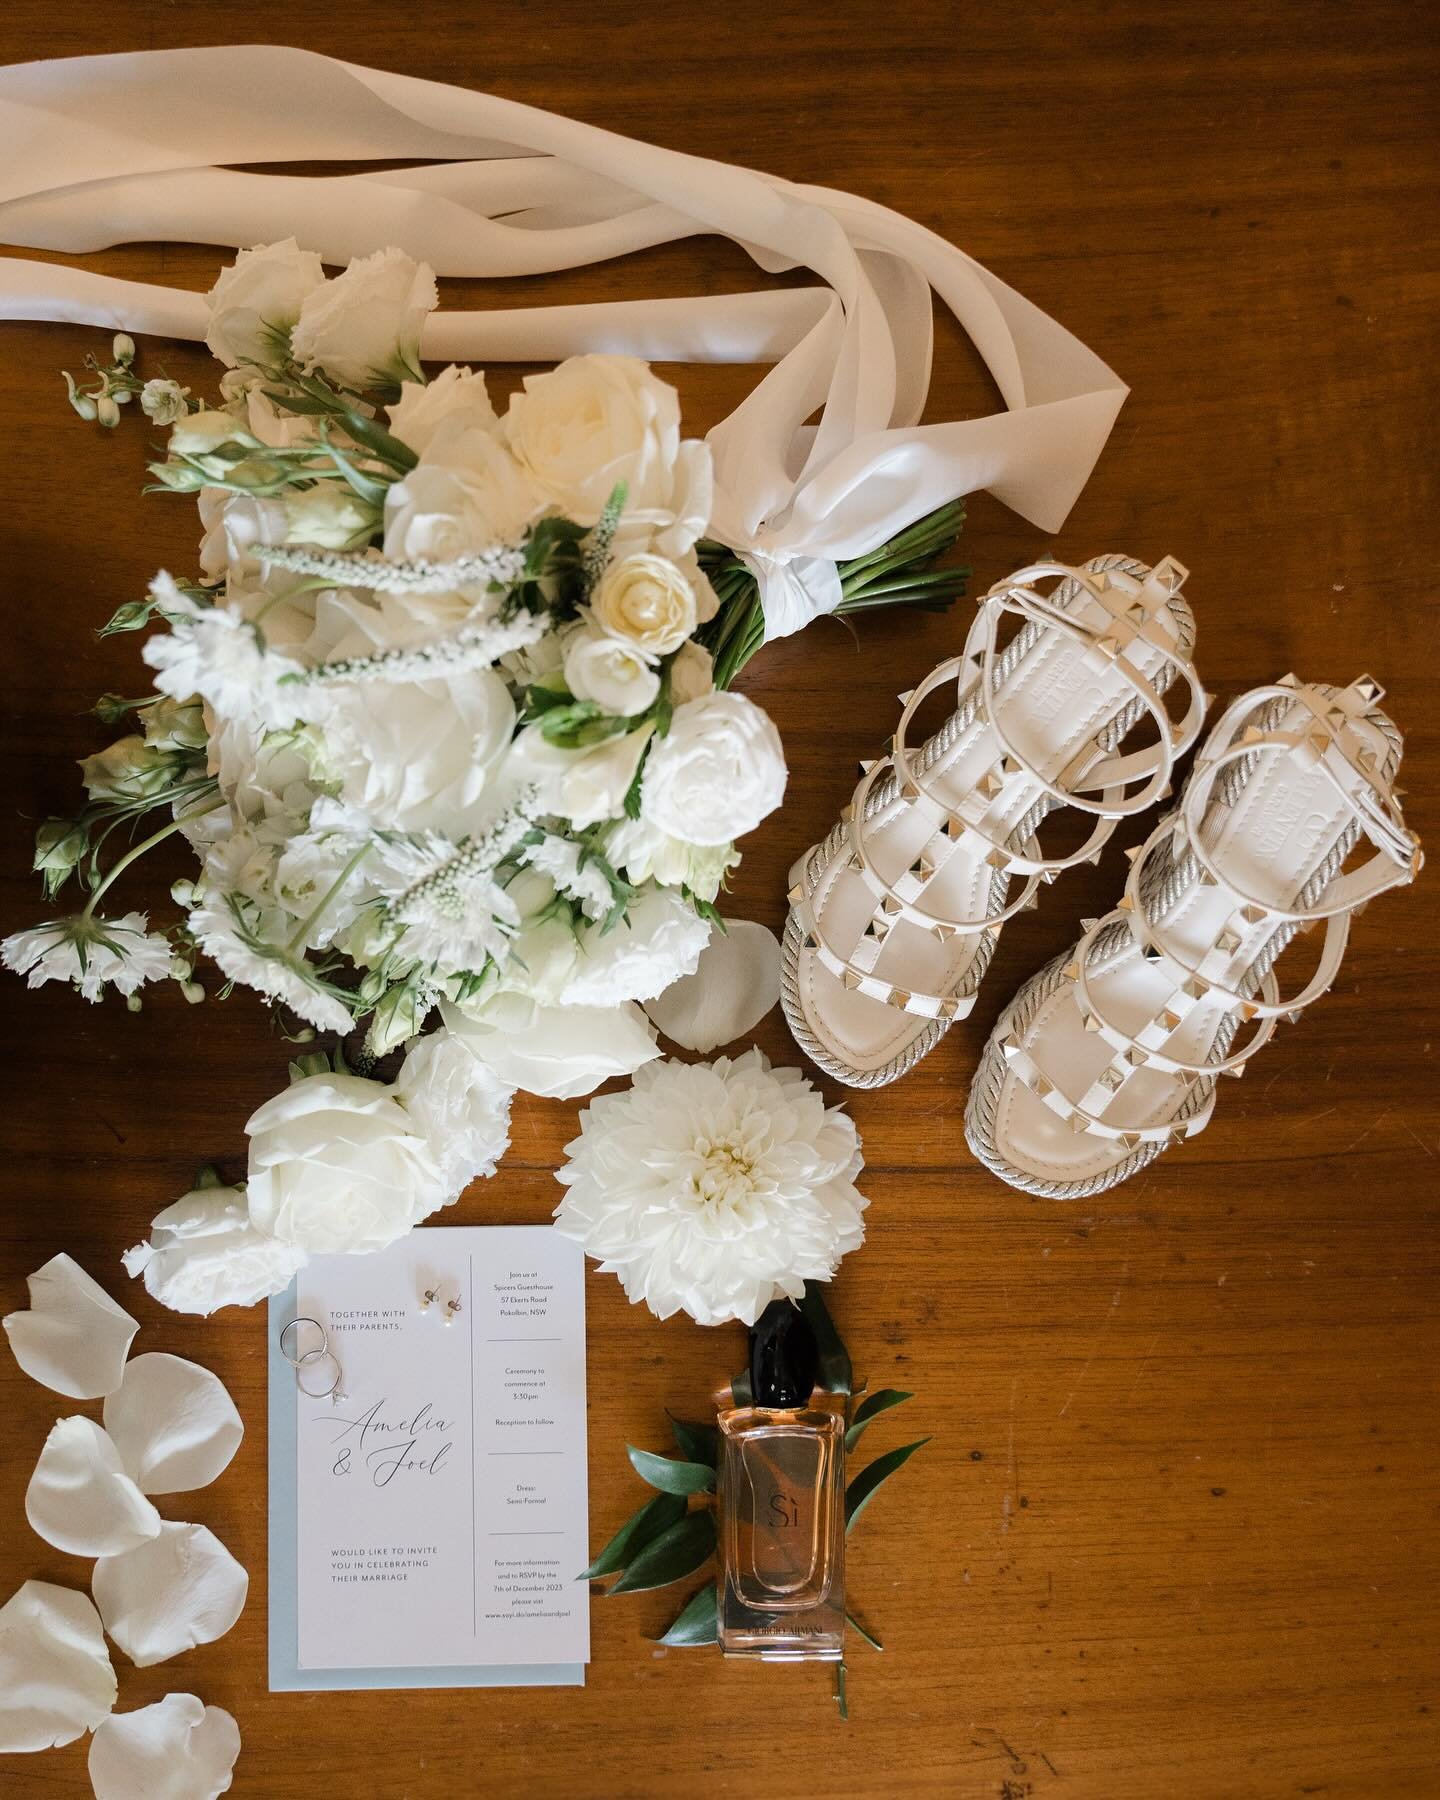 Amelia&rsquo;s classic personal details of her wedding day&hellip;.

Shoes 💫
Elegant fonts 💫
Scent 💫
Jewels💫
and of course flowers by us 💫

@brycenoonephoto 
@spicersguesthouseweddings 

#weddingdetails
#personaltouches
#huntervalleyweddings
#hu